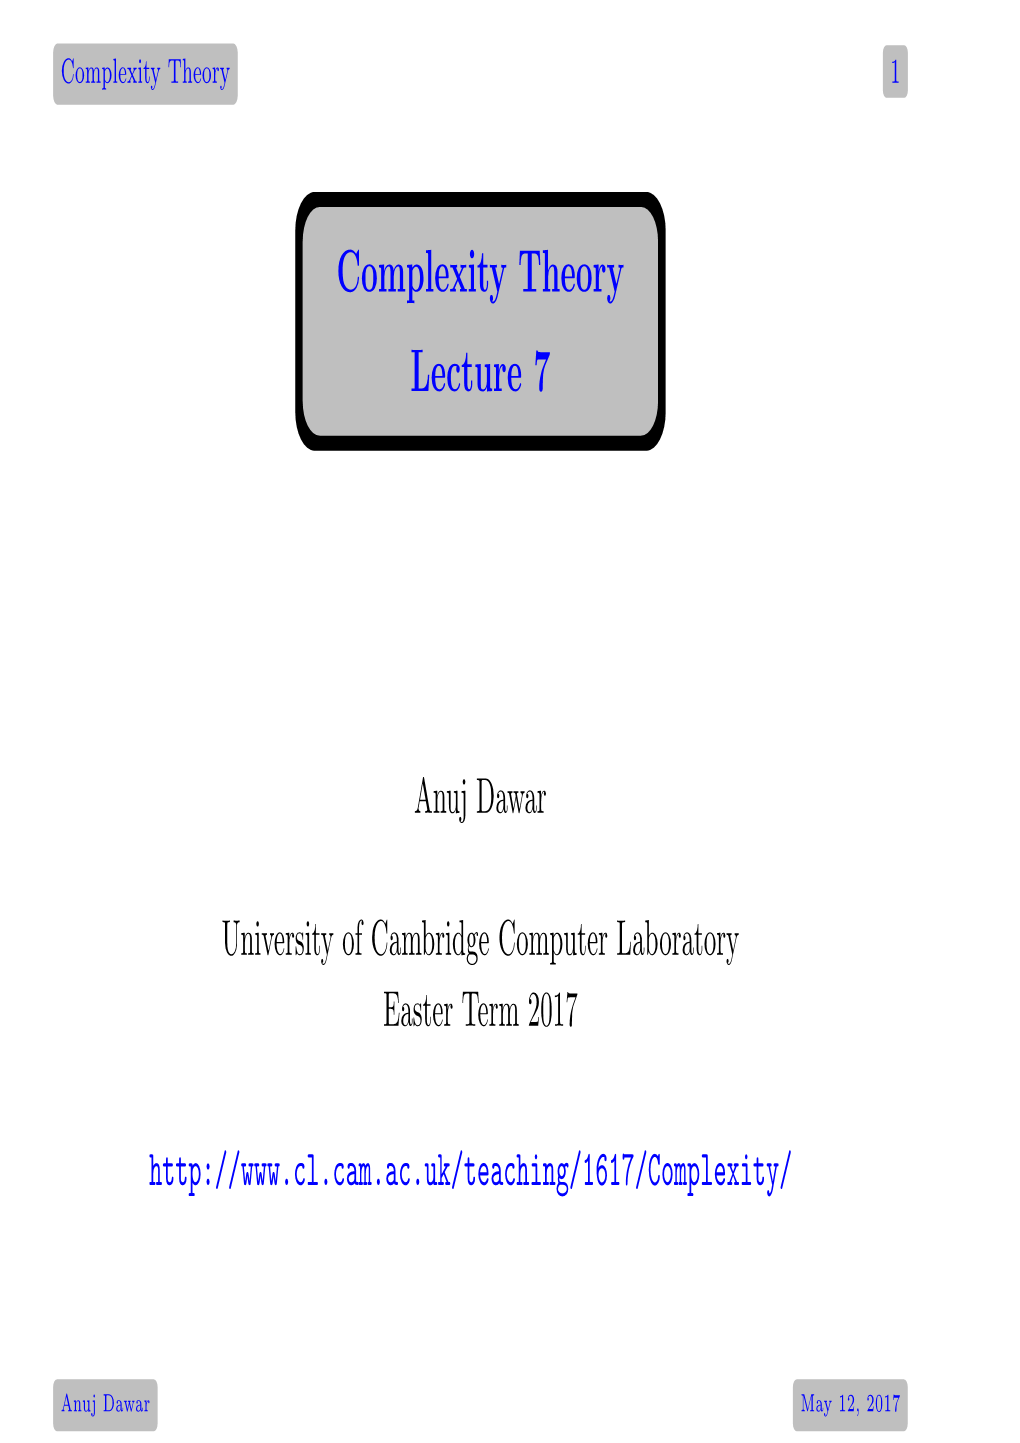 Complexity Theory Lecture 7